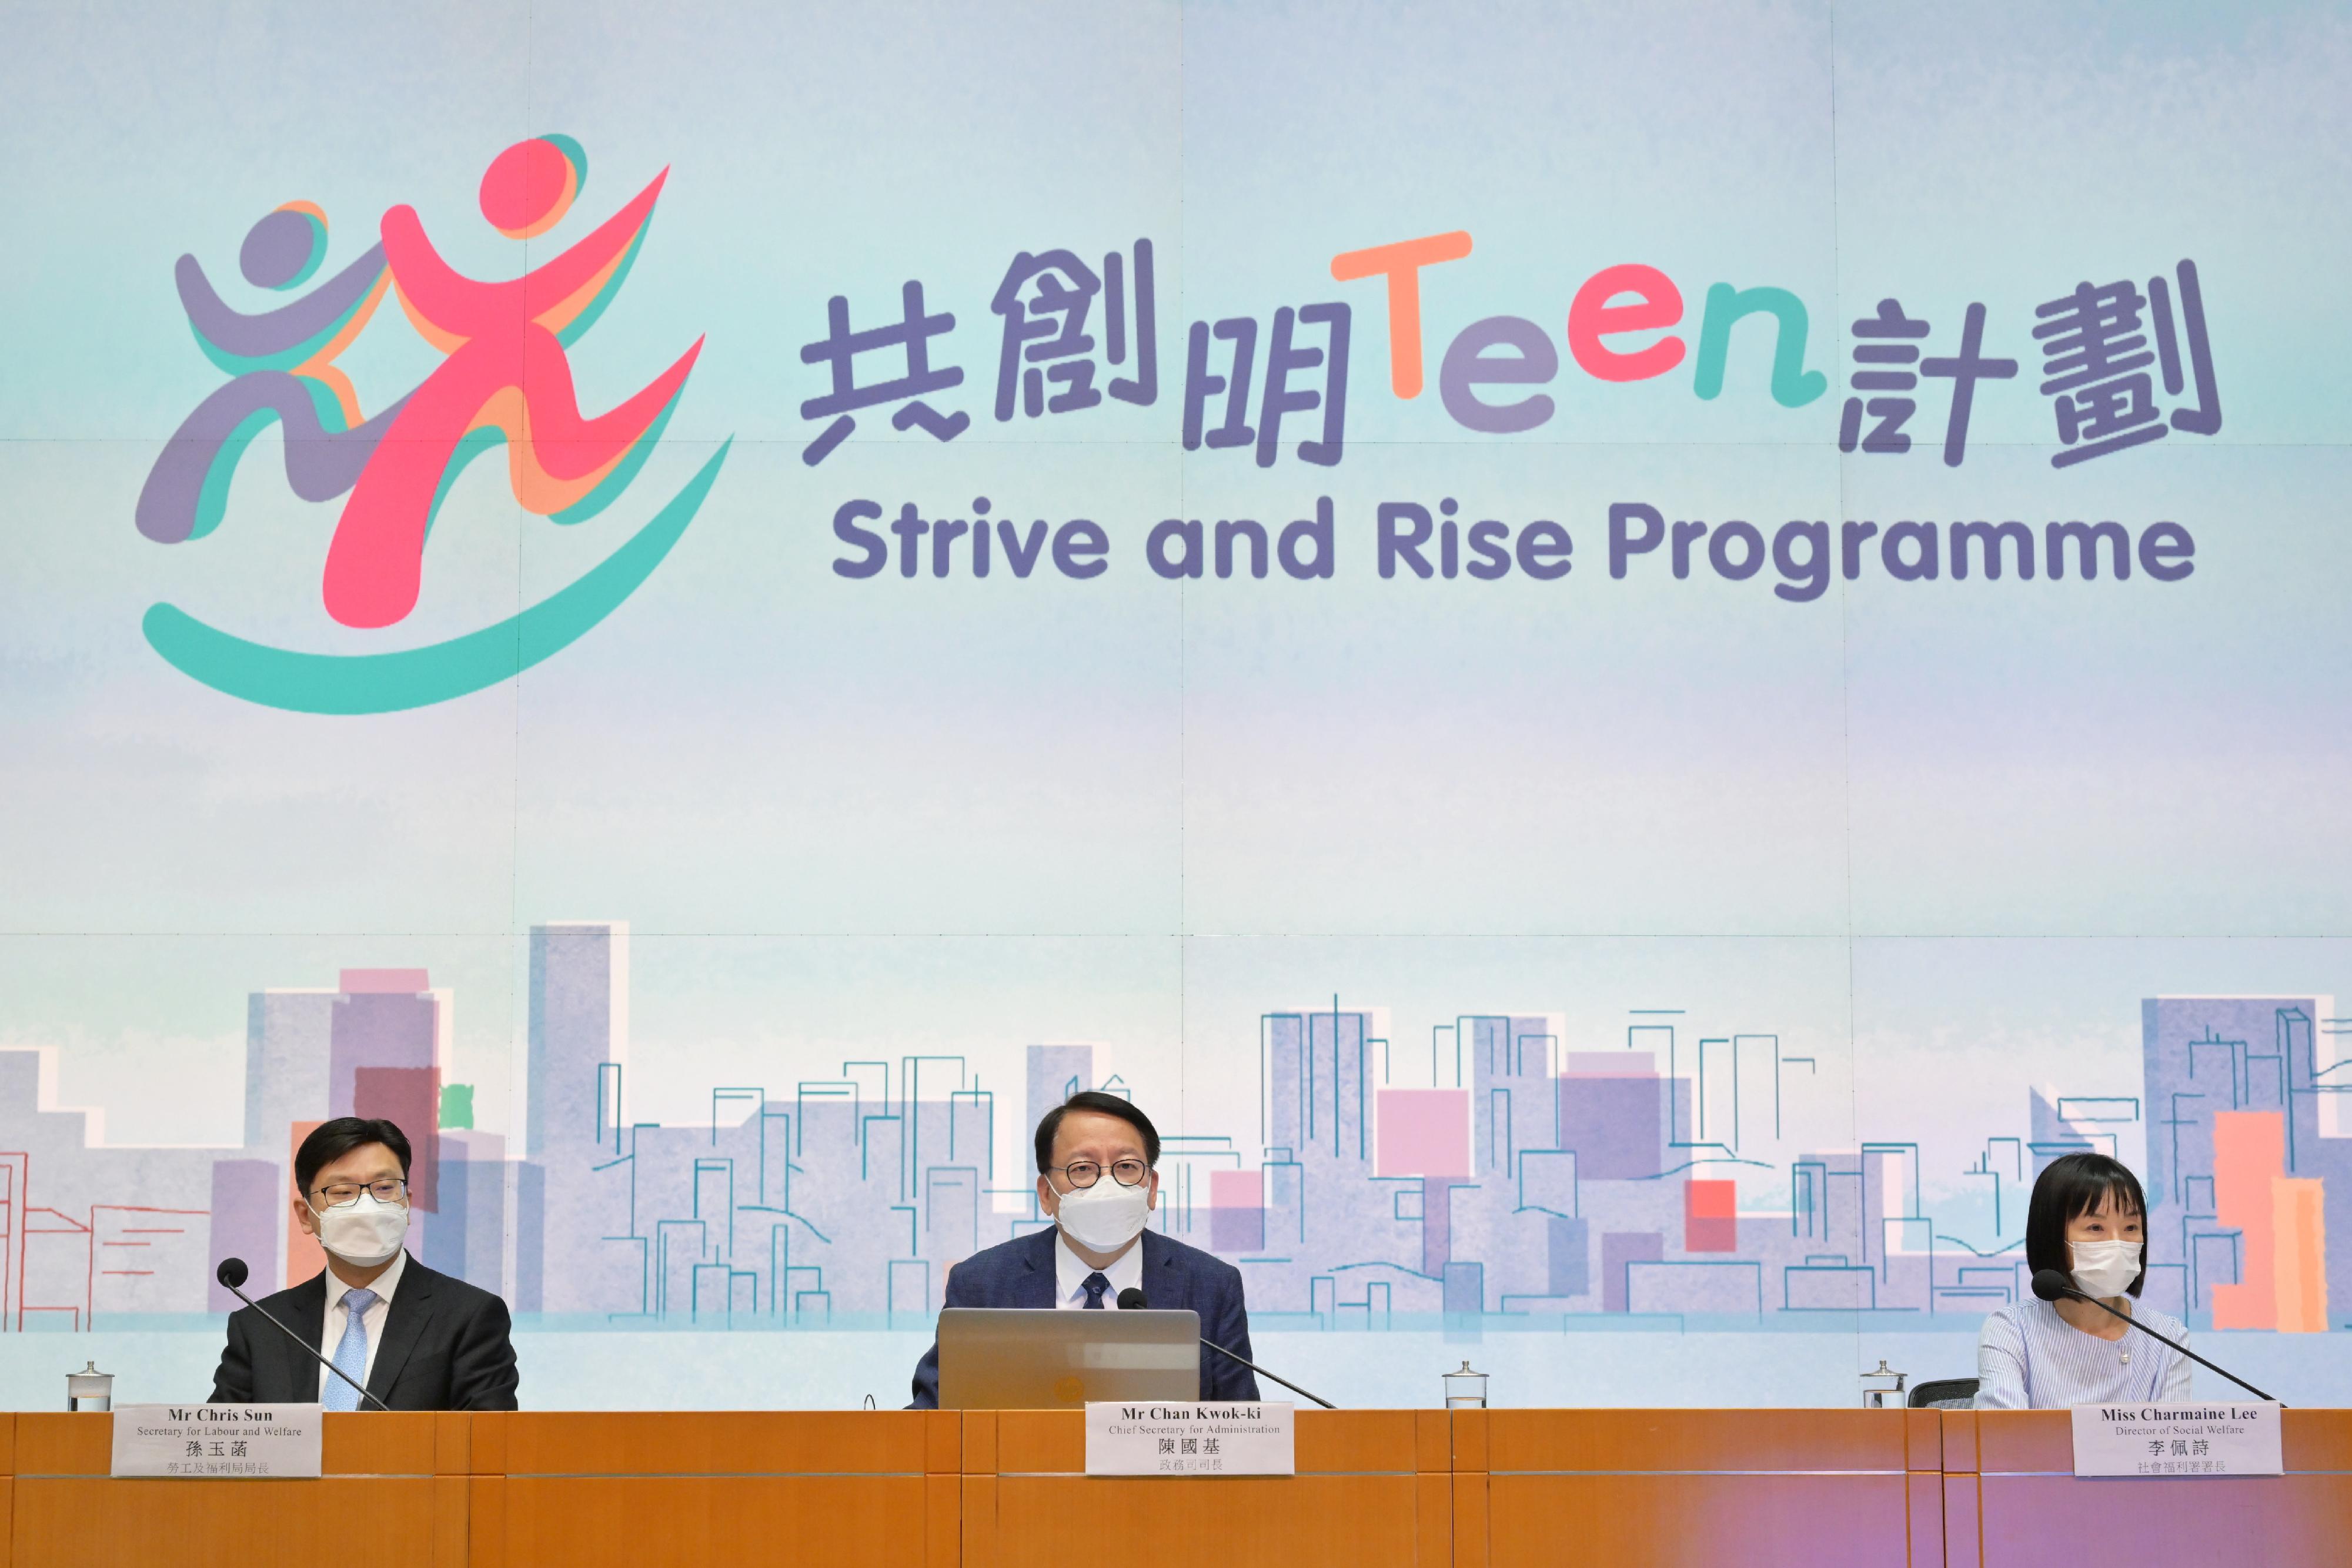 The Chief Secretary for Administration, Mr Chan Kwok-ki (centre), together with the Secretary for Labour and Welfare, Mr Chris Sun (left), and the Director of Social Welfare, Miss Charmaine Lee (right), held a press conference today (August 22) on the Strive and Rise Programme launched by the Task Force to Lift Underprivileged Students out of Intergenerational Poverty at the Central Government Offices, Tamar.